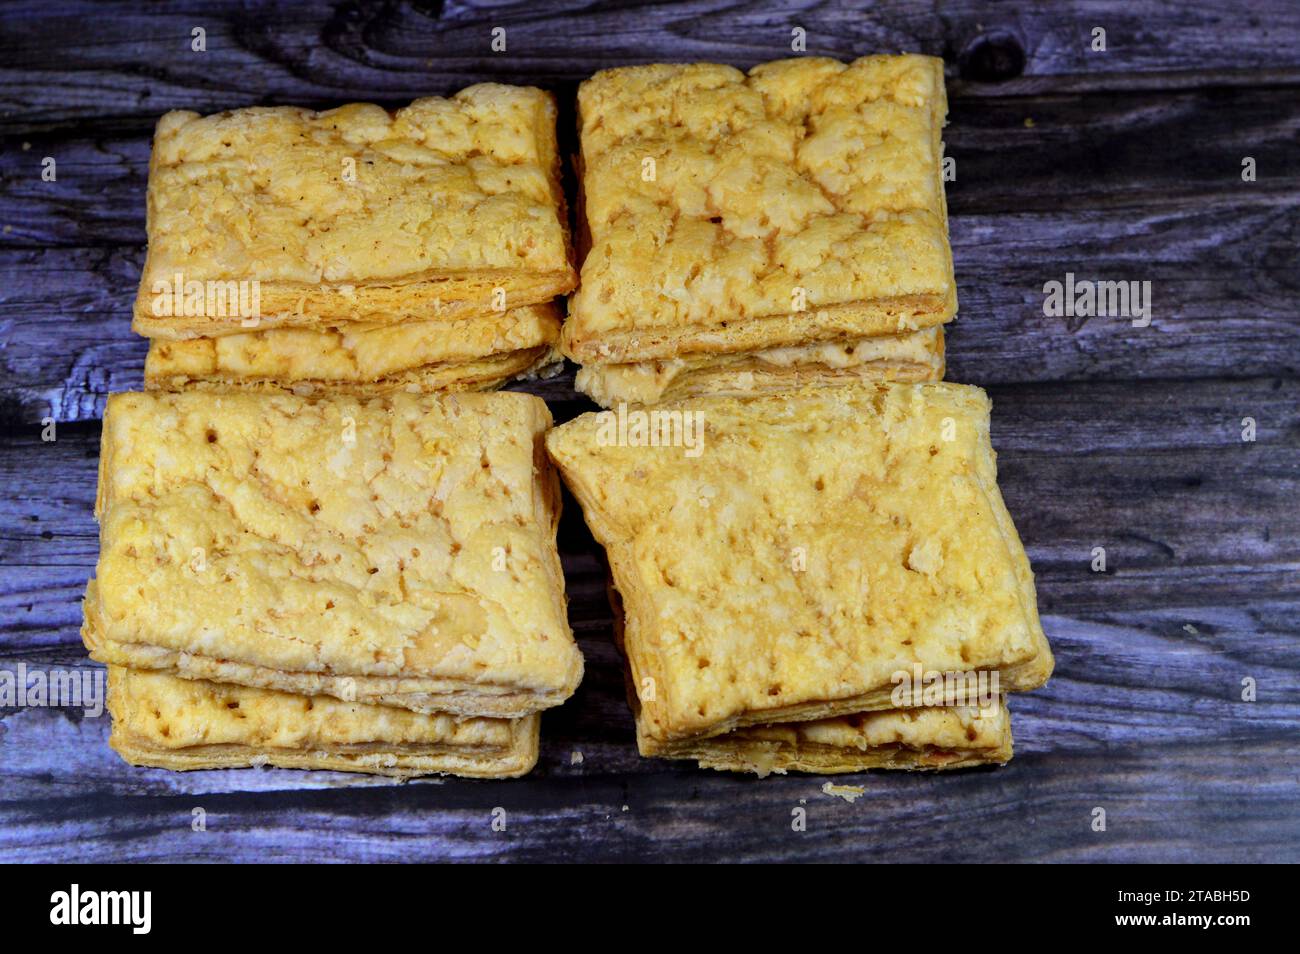 mille-feuille, millefeuille, Napoleon, vanilla and custard slice, a French dessert made of puff pastry layered with pastry cream, traditionally made u Stock Photo